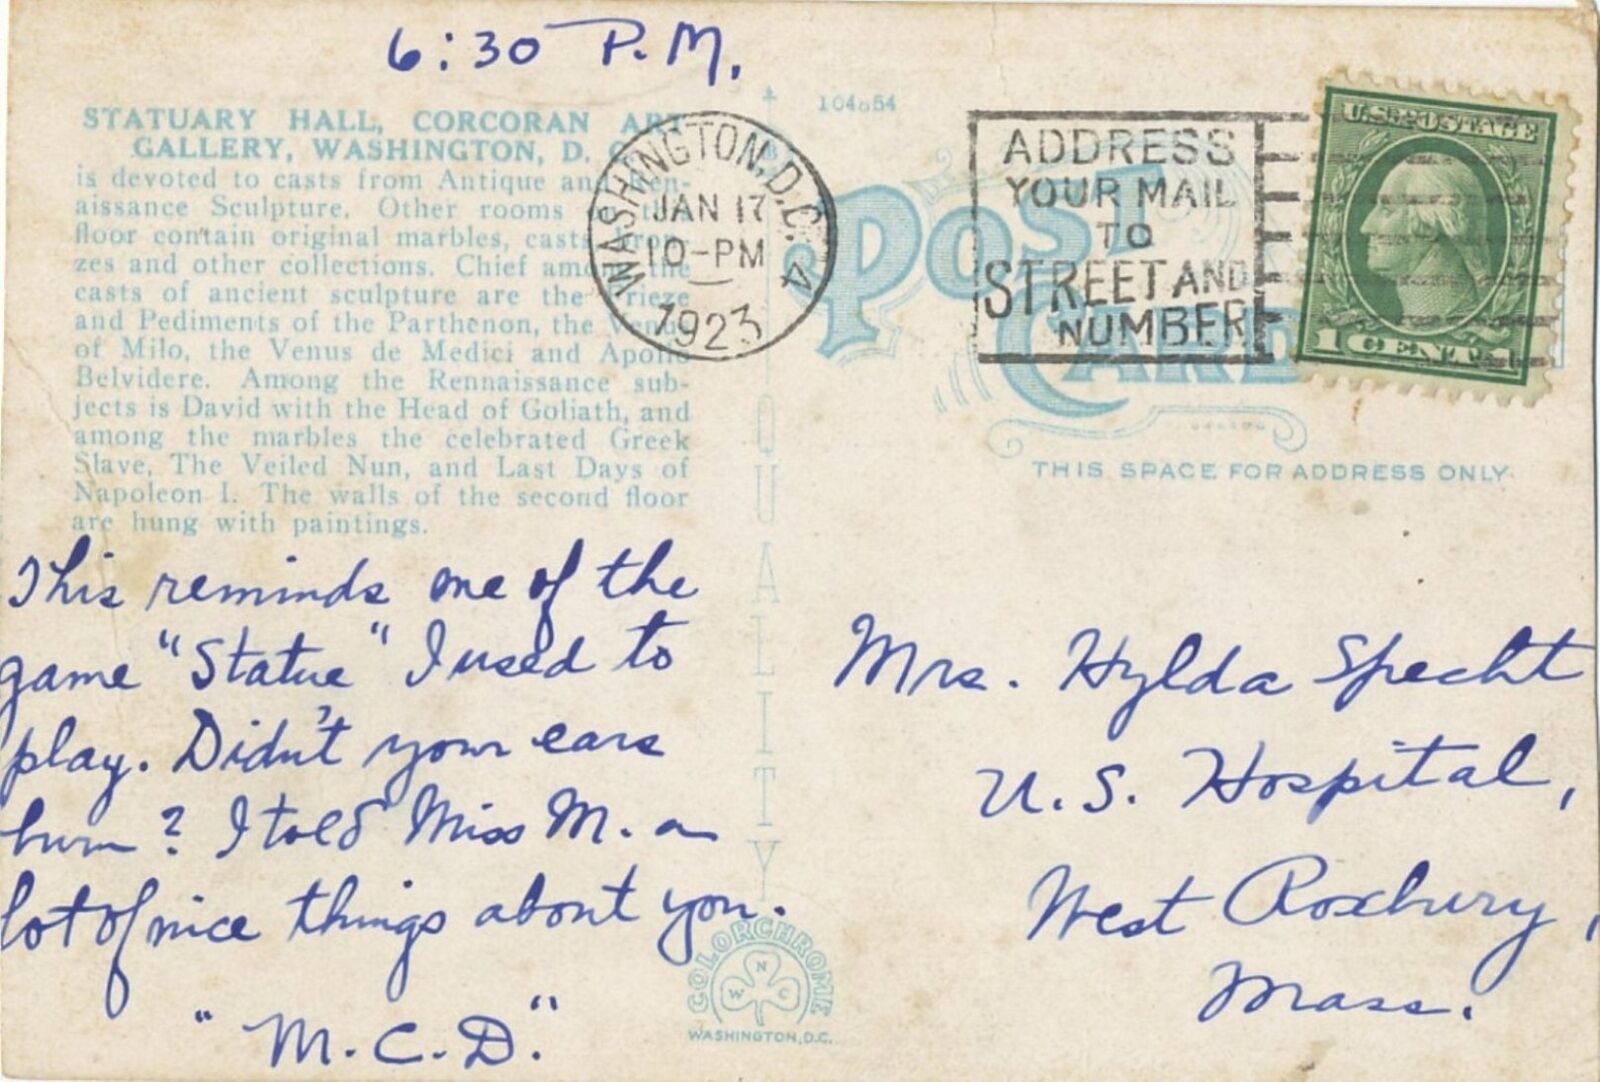 Cancel/Postcard - Washington DC 1923 ADDRESS YOUR MAIL TO STREET AND NUMBER